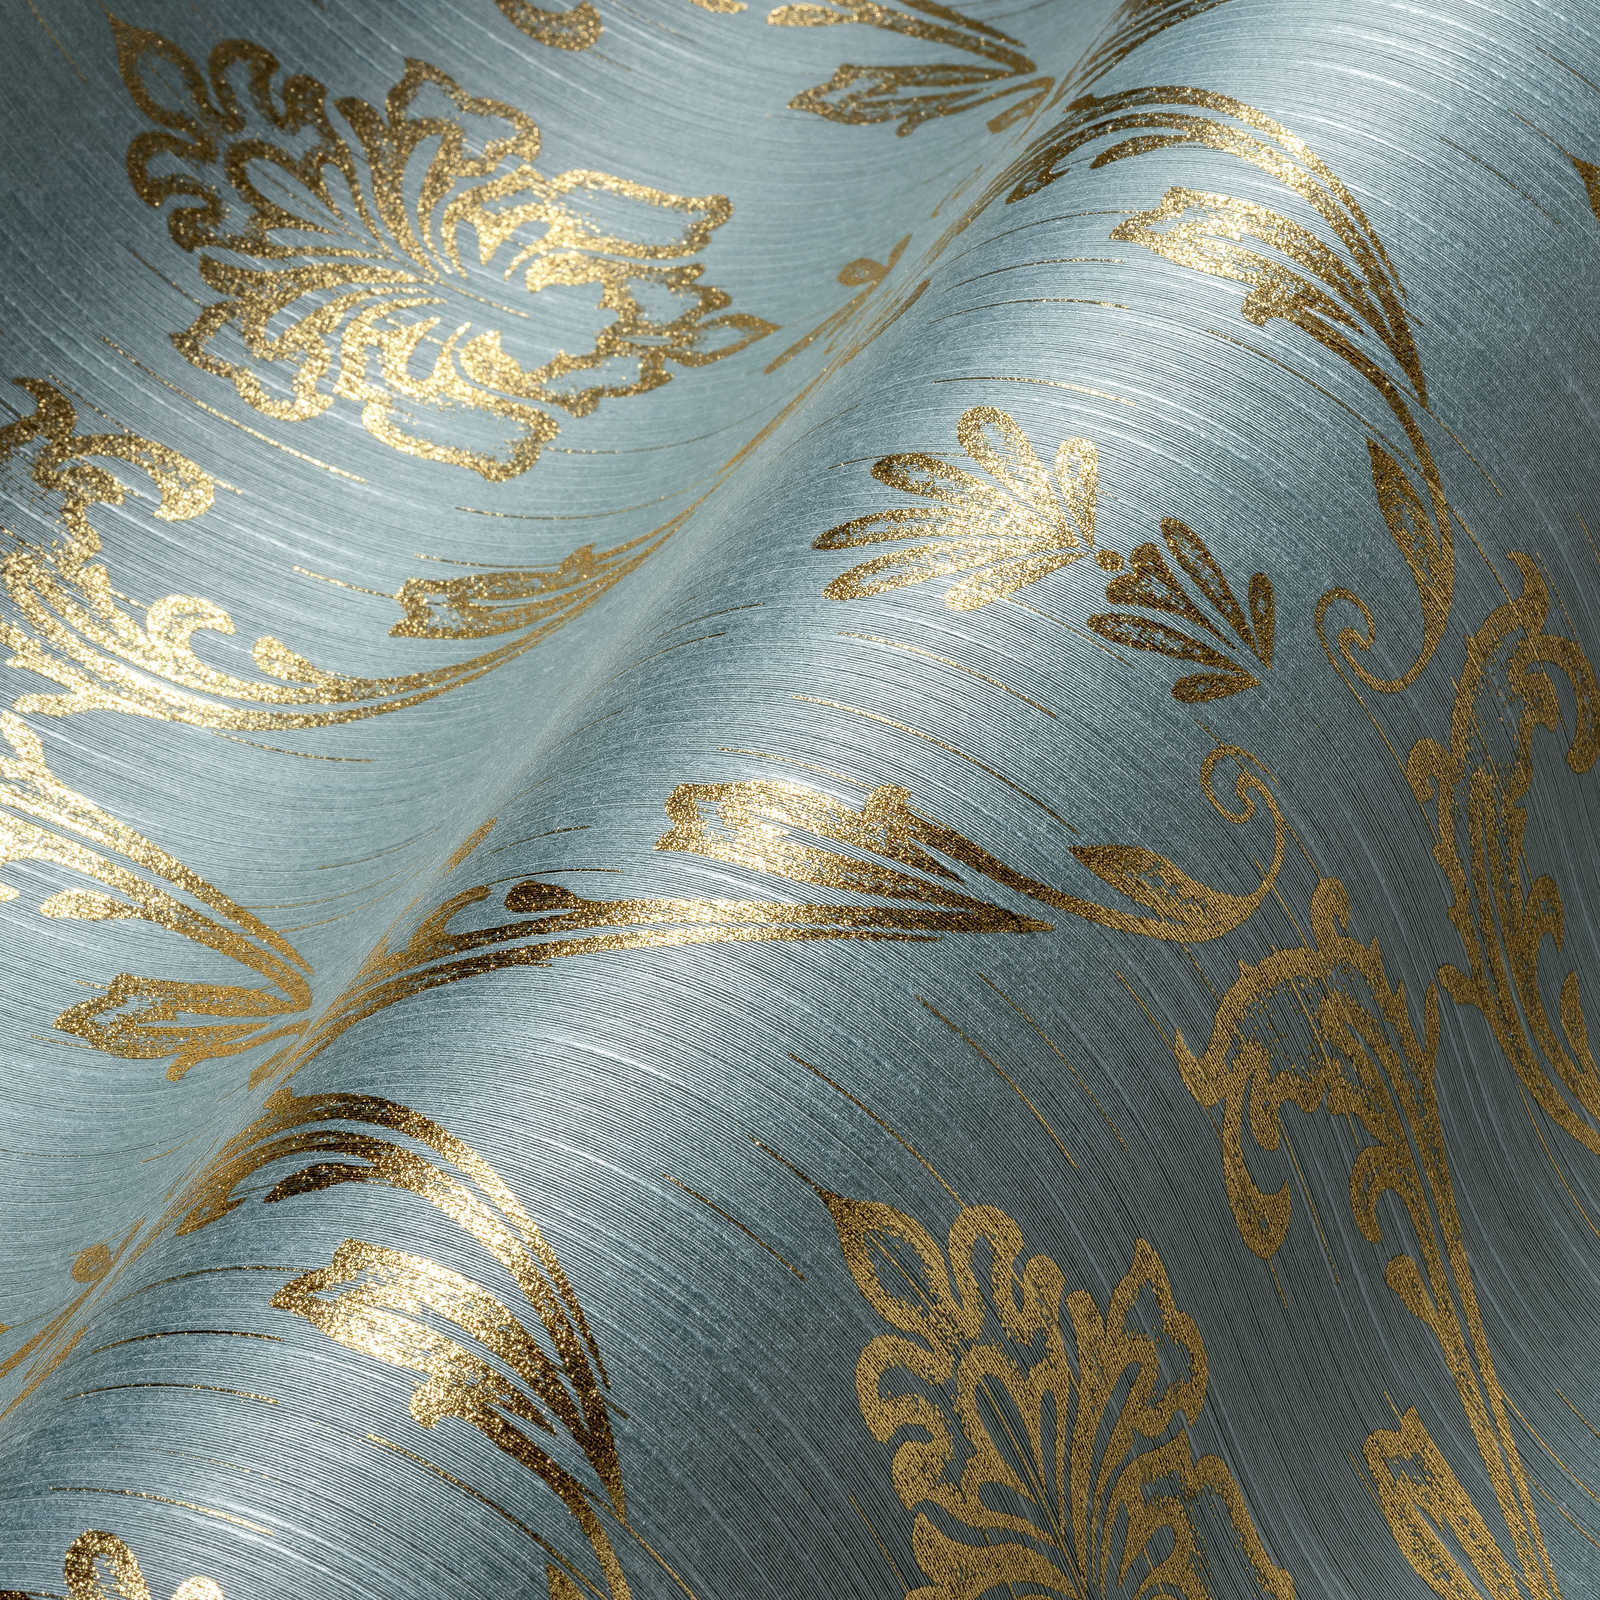             Ornamental wallpaper with floral elements in gold - gold, blue, green
        